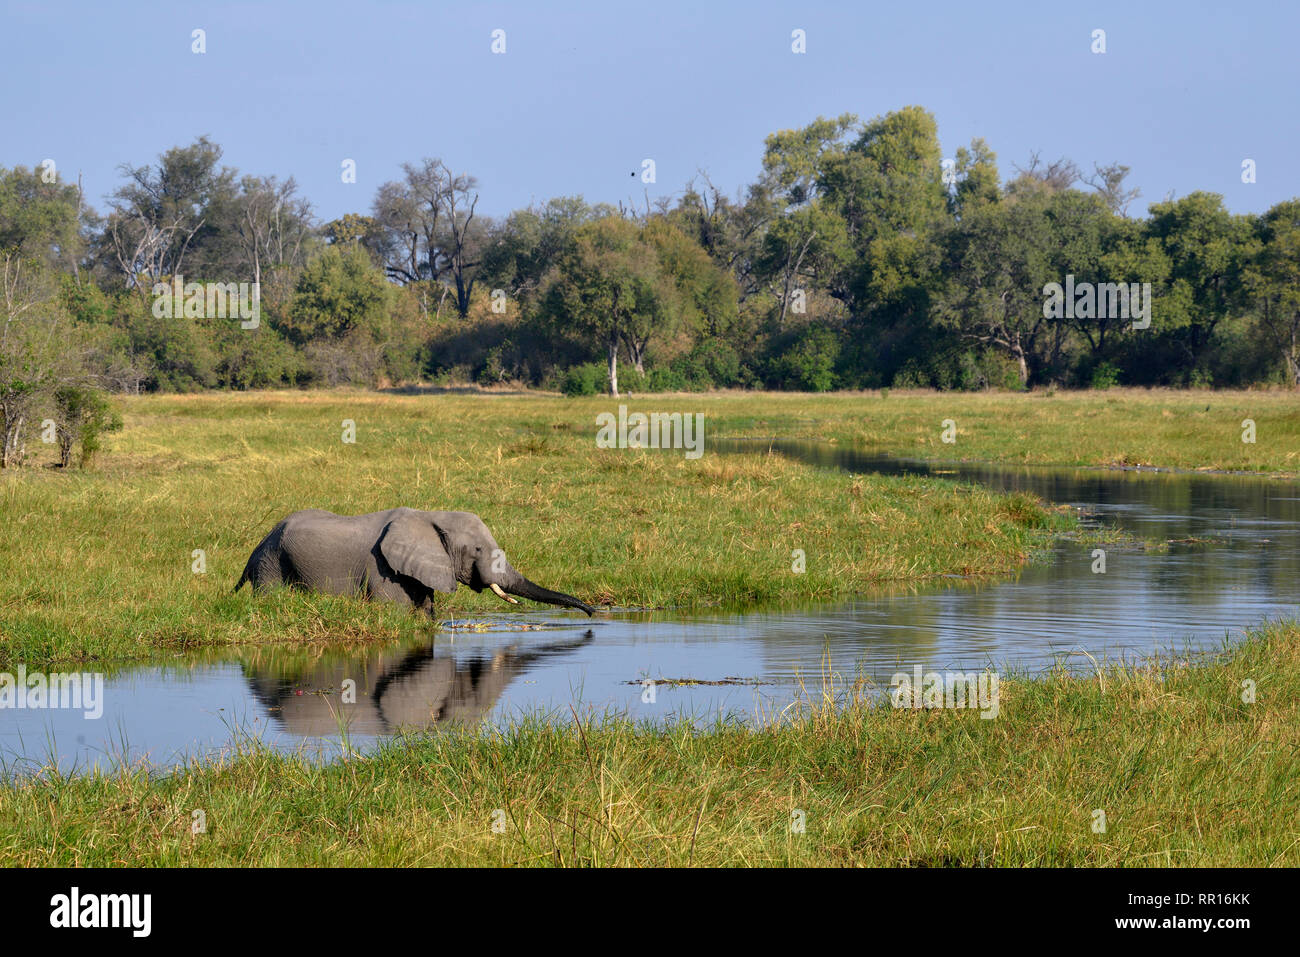 Zoologie, Säugetiere (Mammalia), Elefant (Loxodonta africana), Khwai Gegend, North-West District, Okavango D, Additional-Rights - Clearance-Info - Not-Available Stockfoto